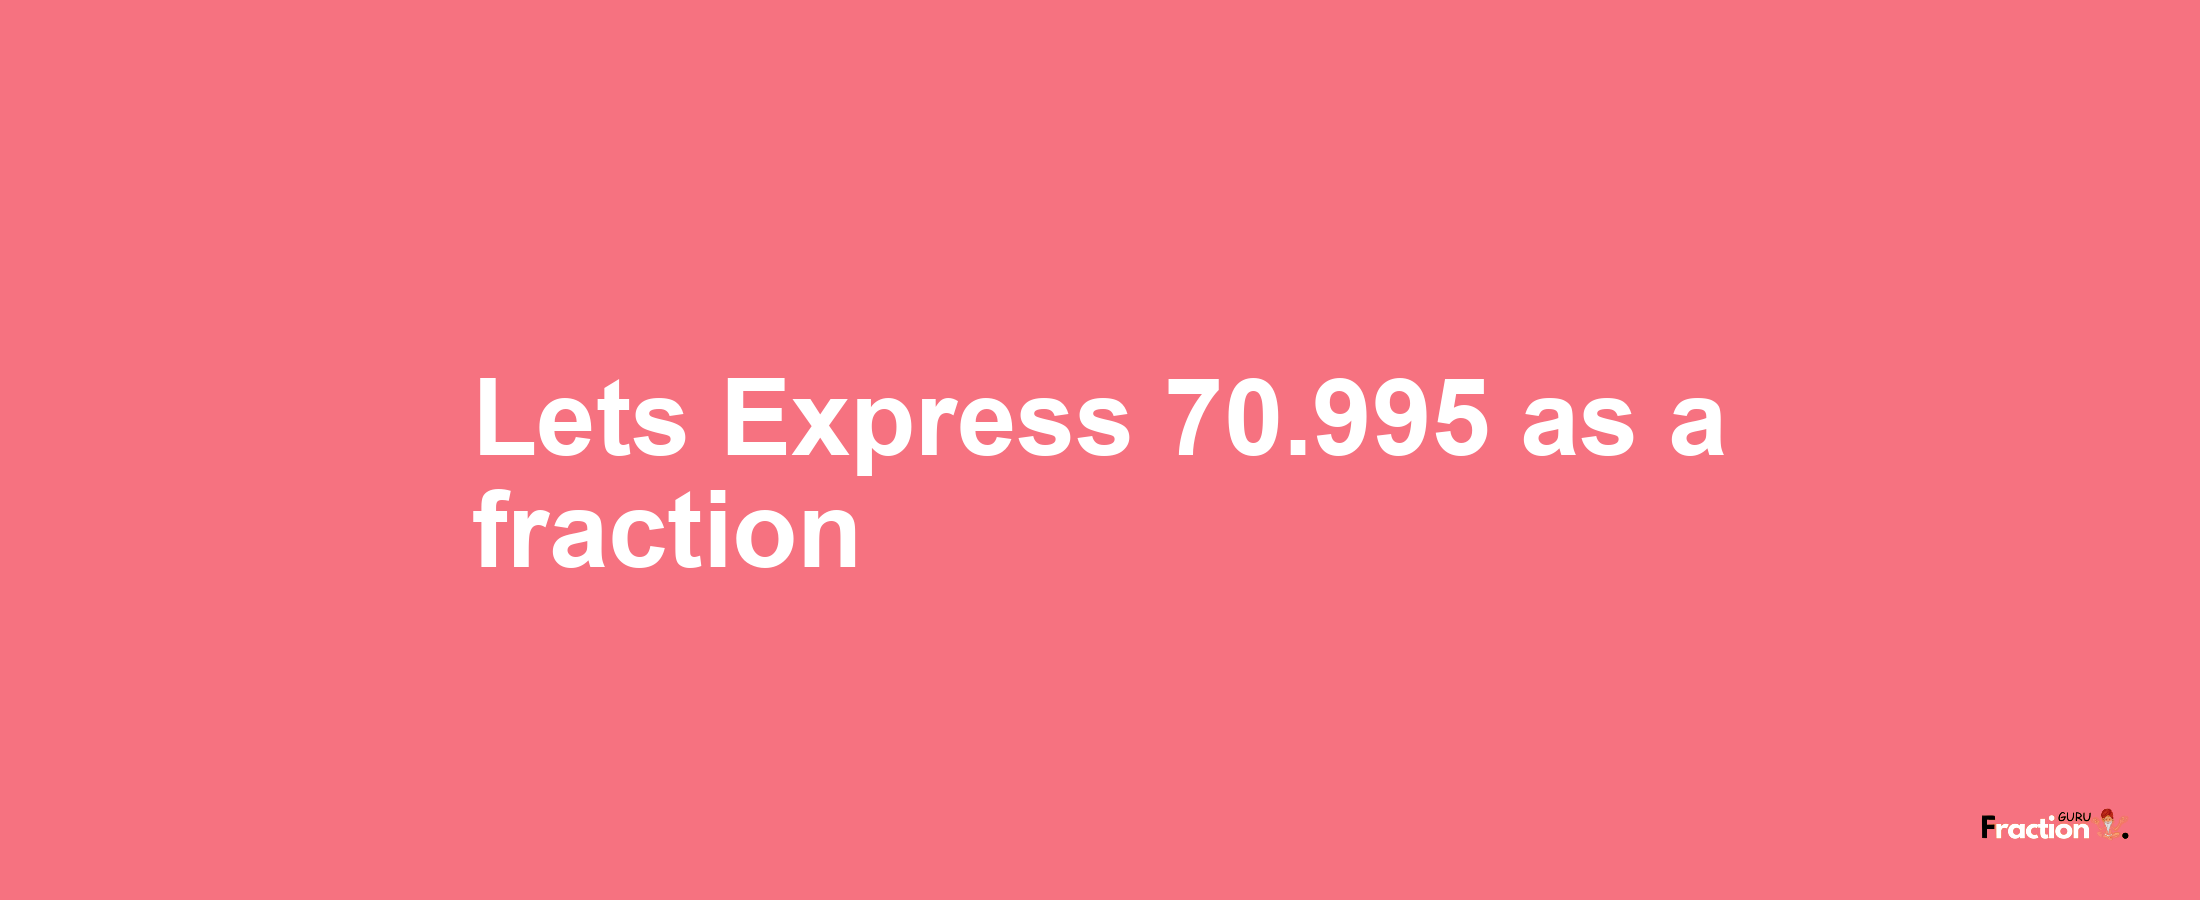 Lets Express 70.995 as afraction